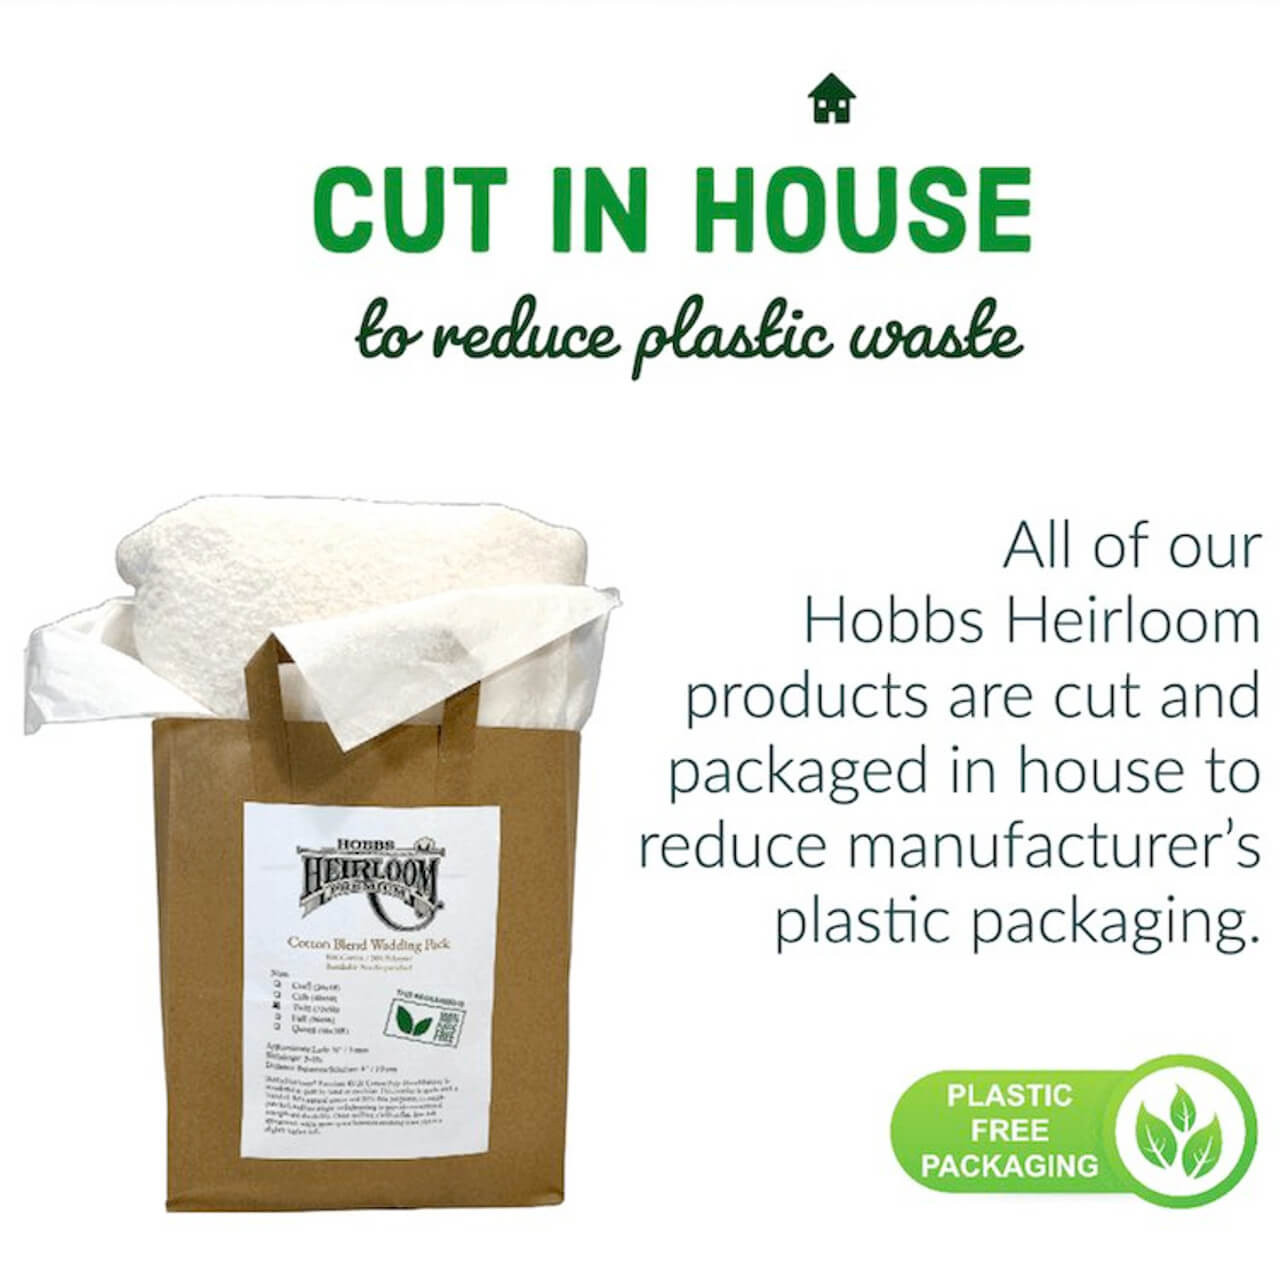 We cut all our Heirloom Natural Wadding in house and use plastic free packaging to reduce manufacturer's plastic packaging.